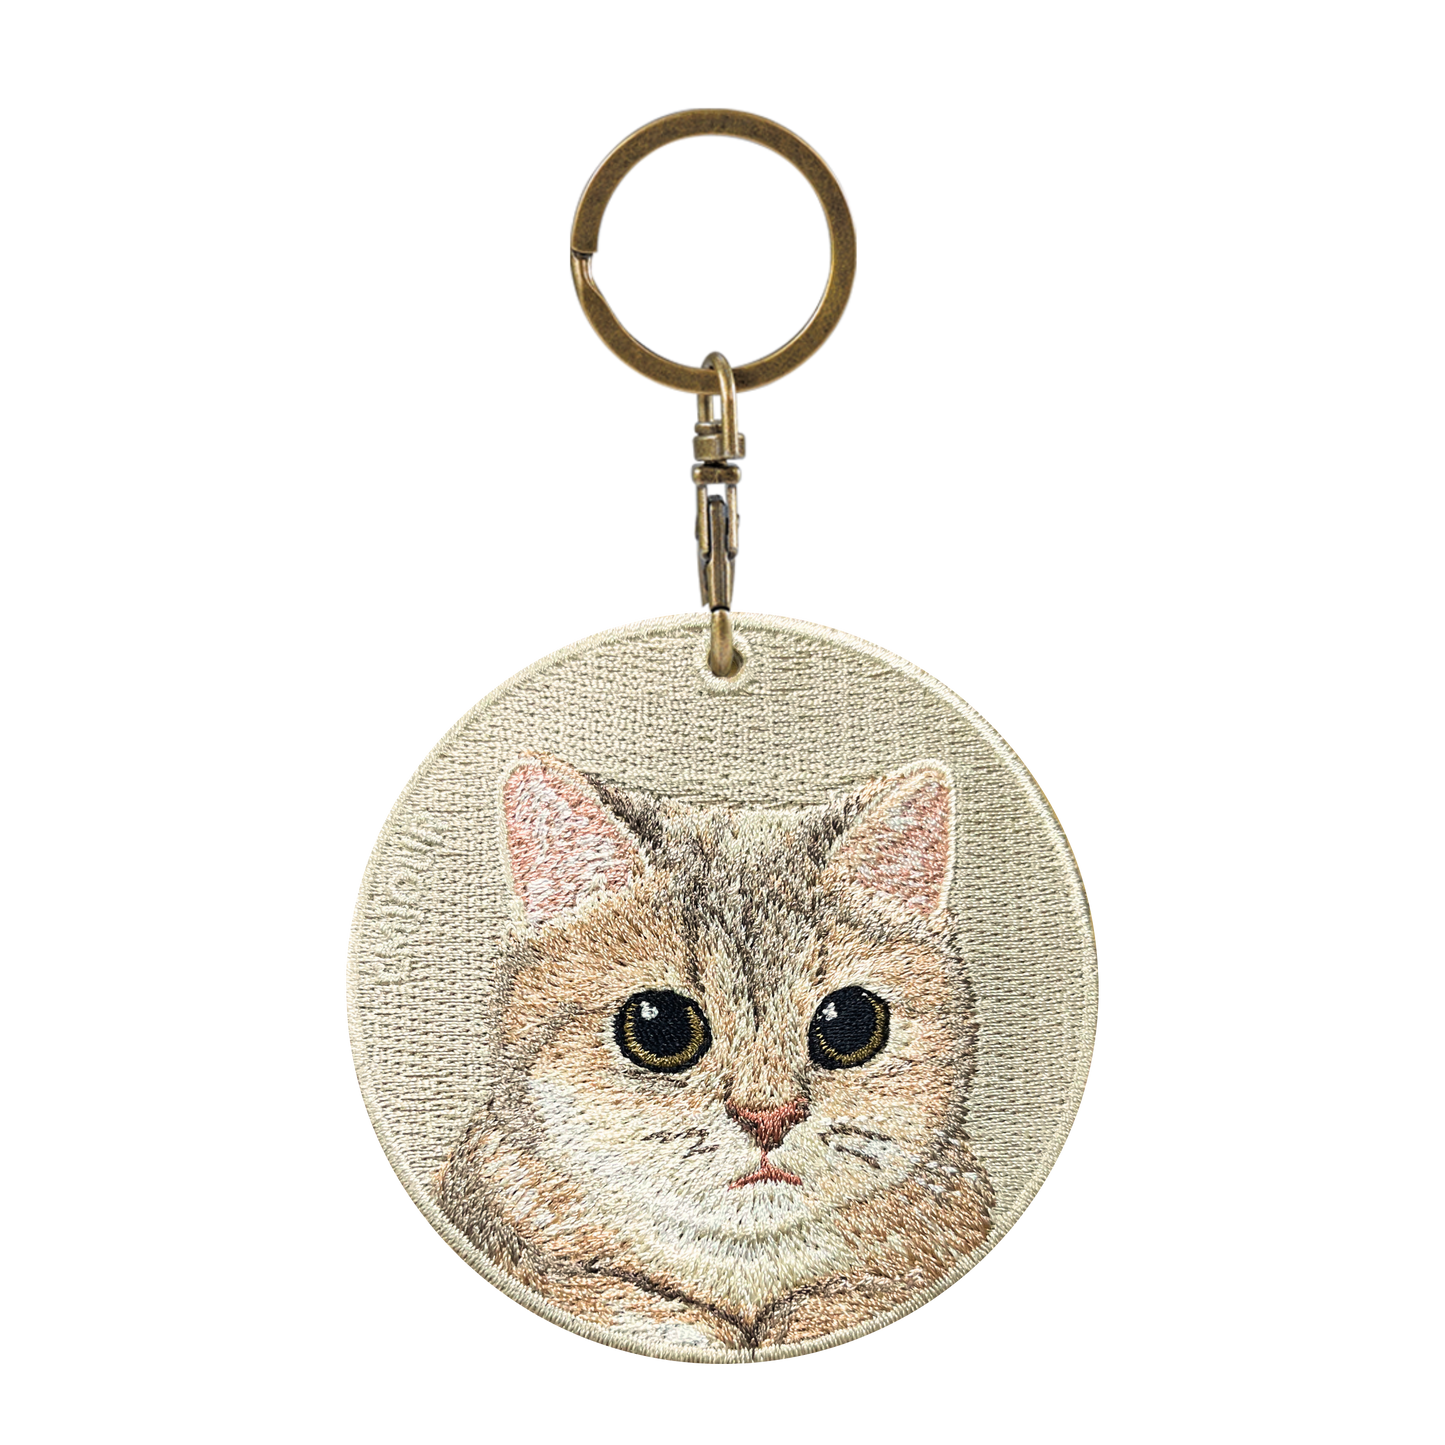 Double Embroidered Chandelier-Blue and Gold Graded British Short-haired Cat